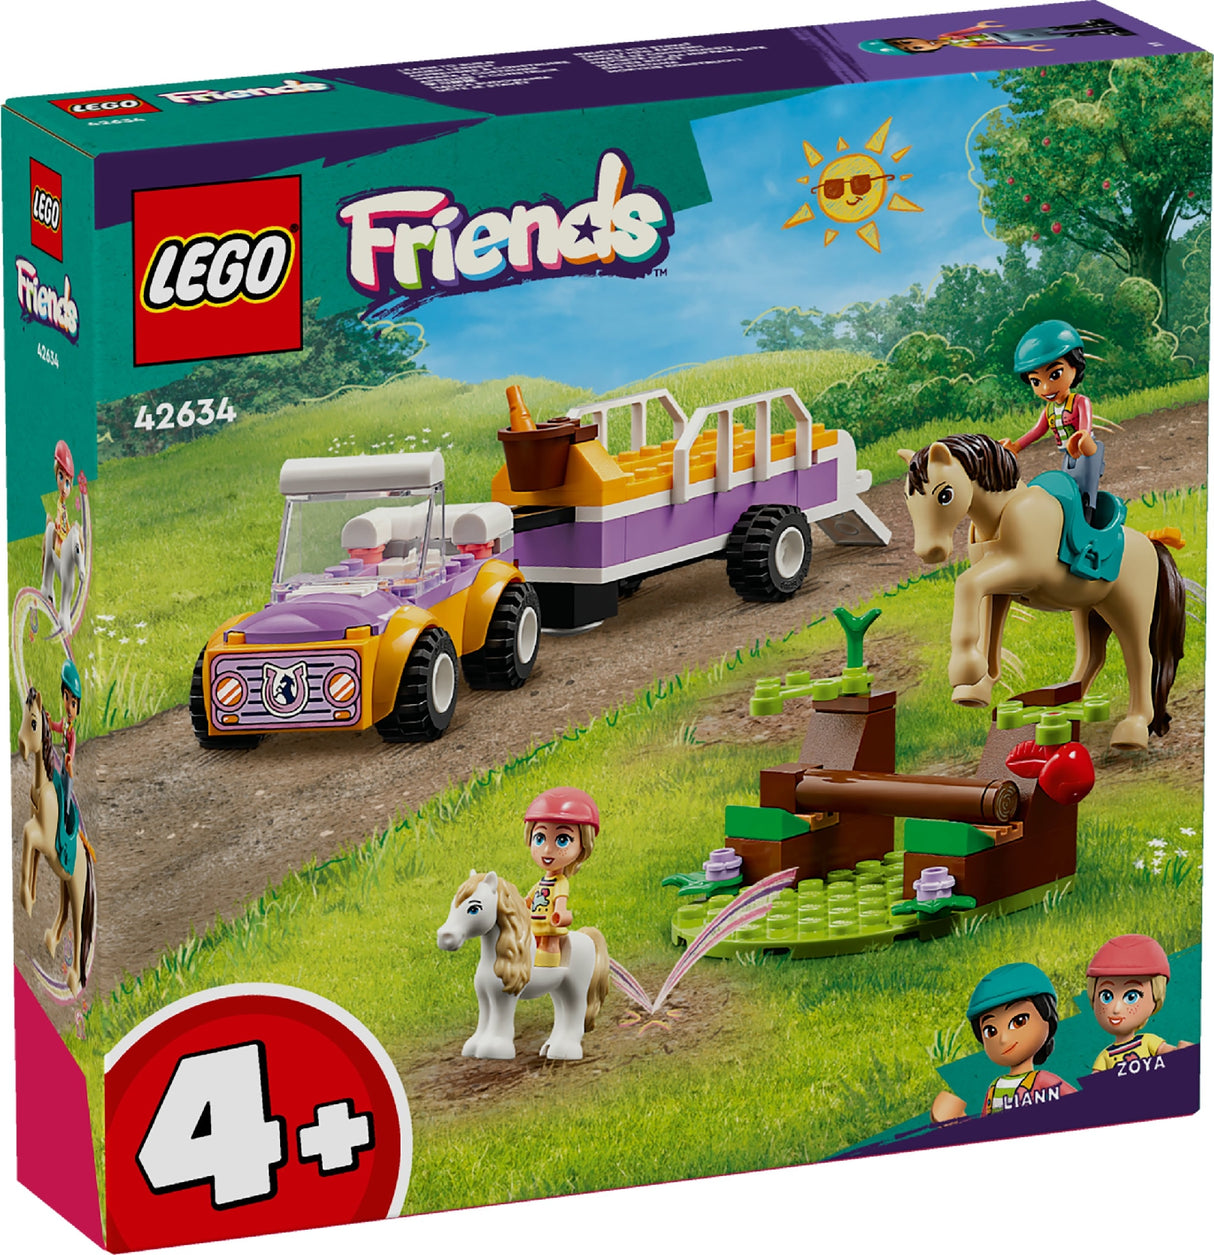 LEGO FRIENDS HORSE AND PONY TRAILER 42634 AGE: 4+